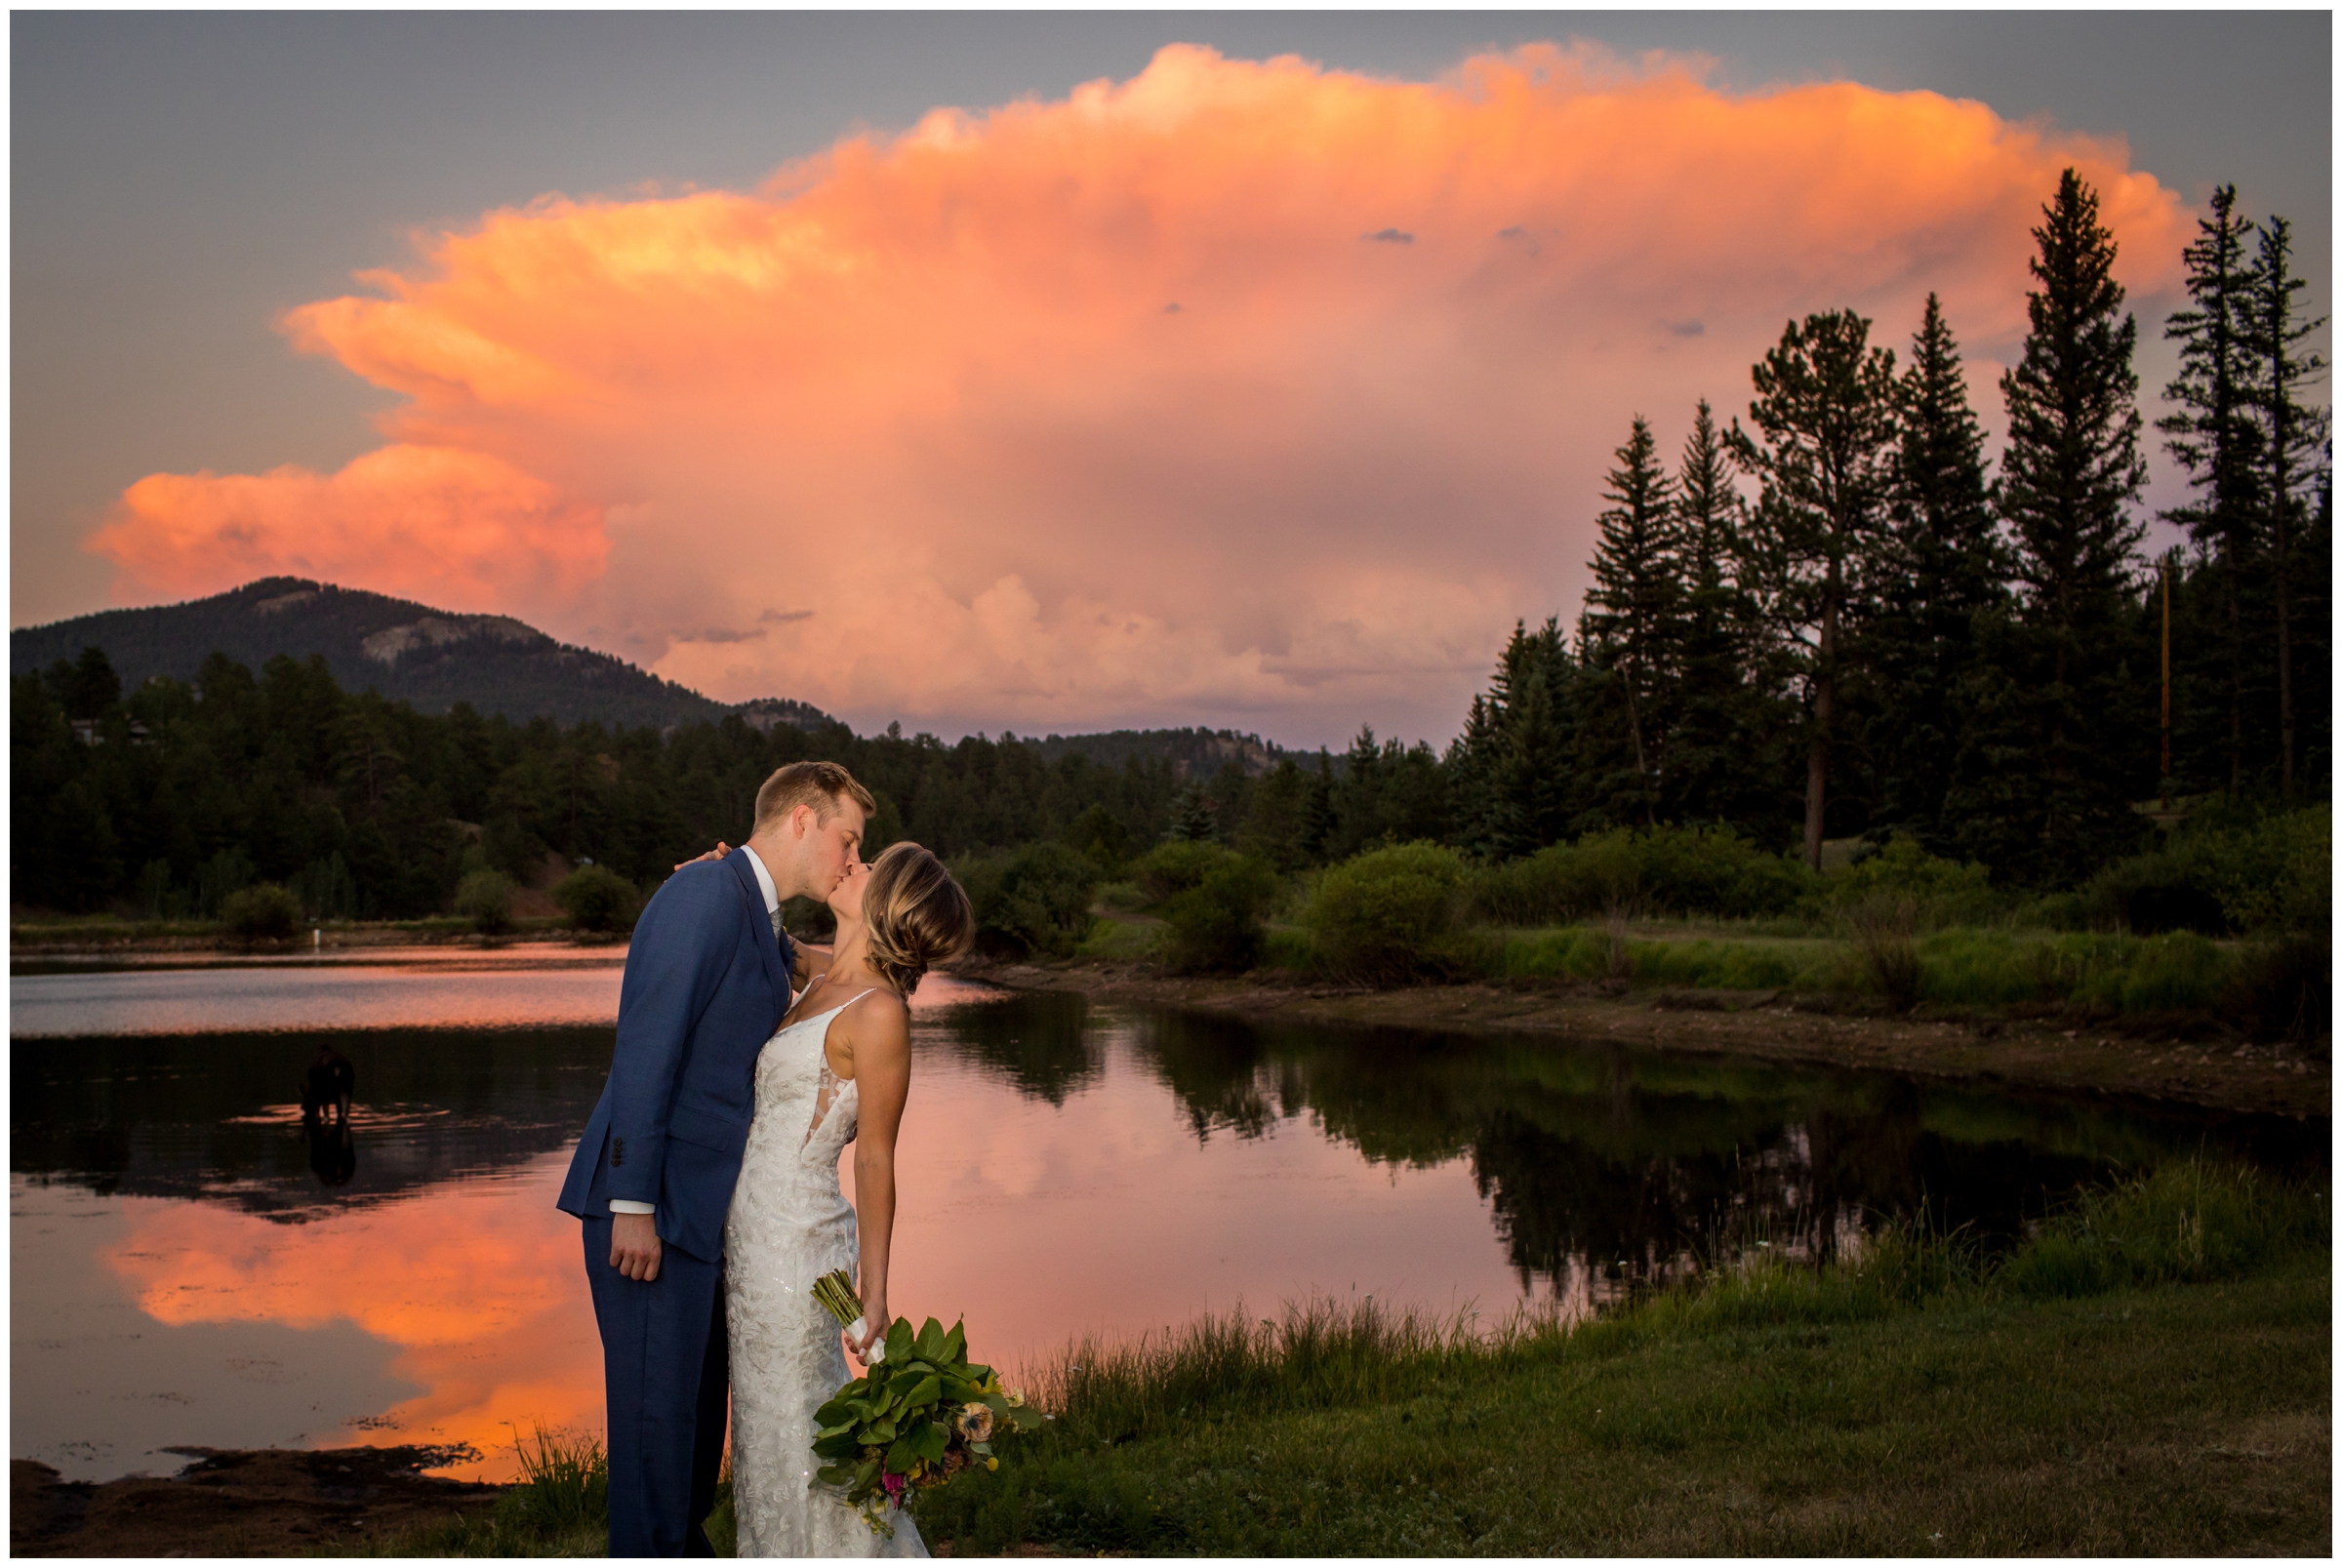 colorful wedding sunset portraits at Mountain View Ranch Wedgewood wedding by Colorado wedding photographer Plum Pretty Photo